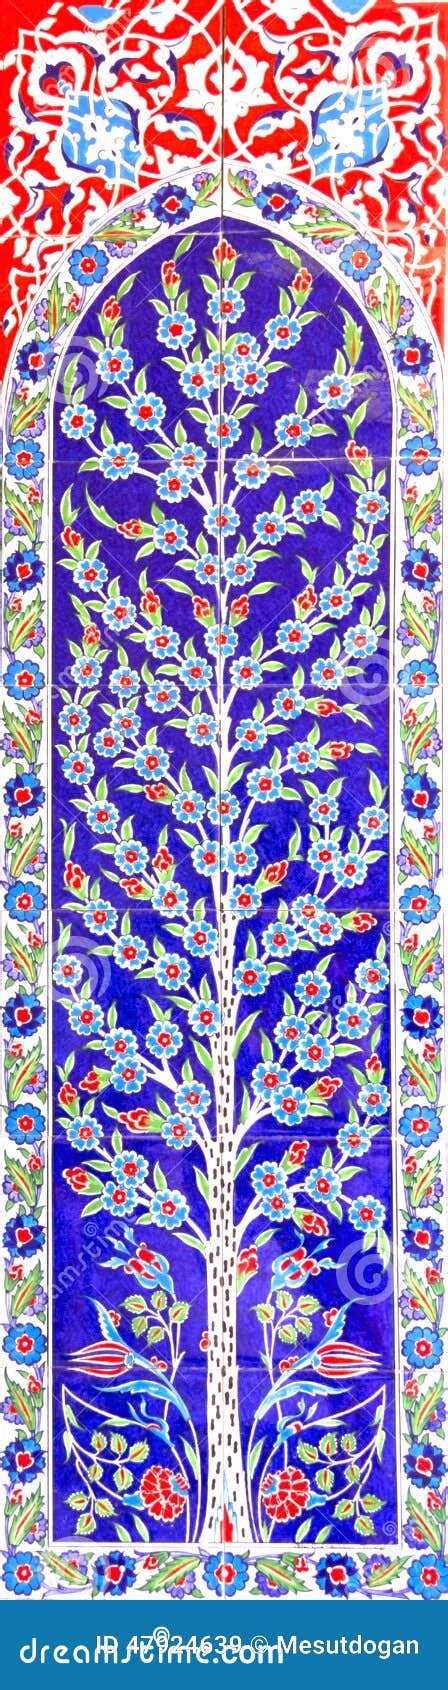 Turkish Artistic Wall Tile At The Fatih Mosque Stock Image Image Of